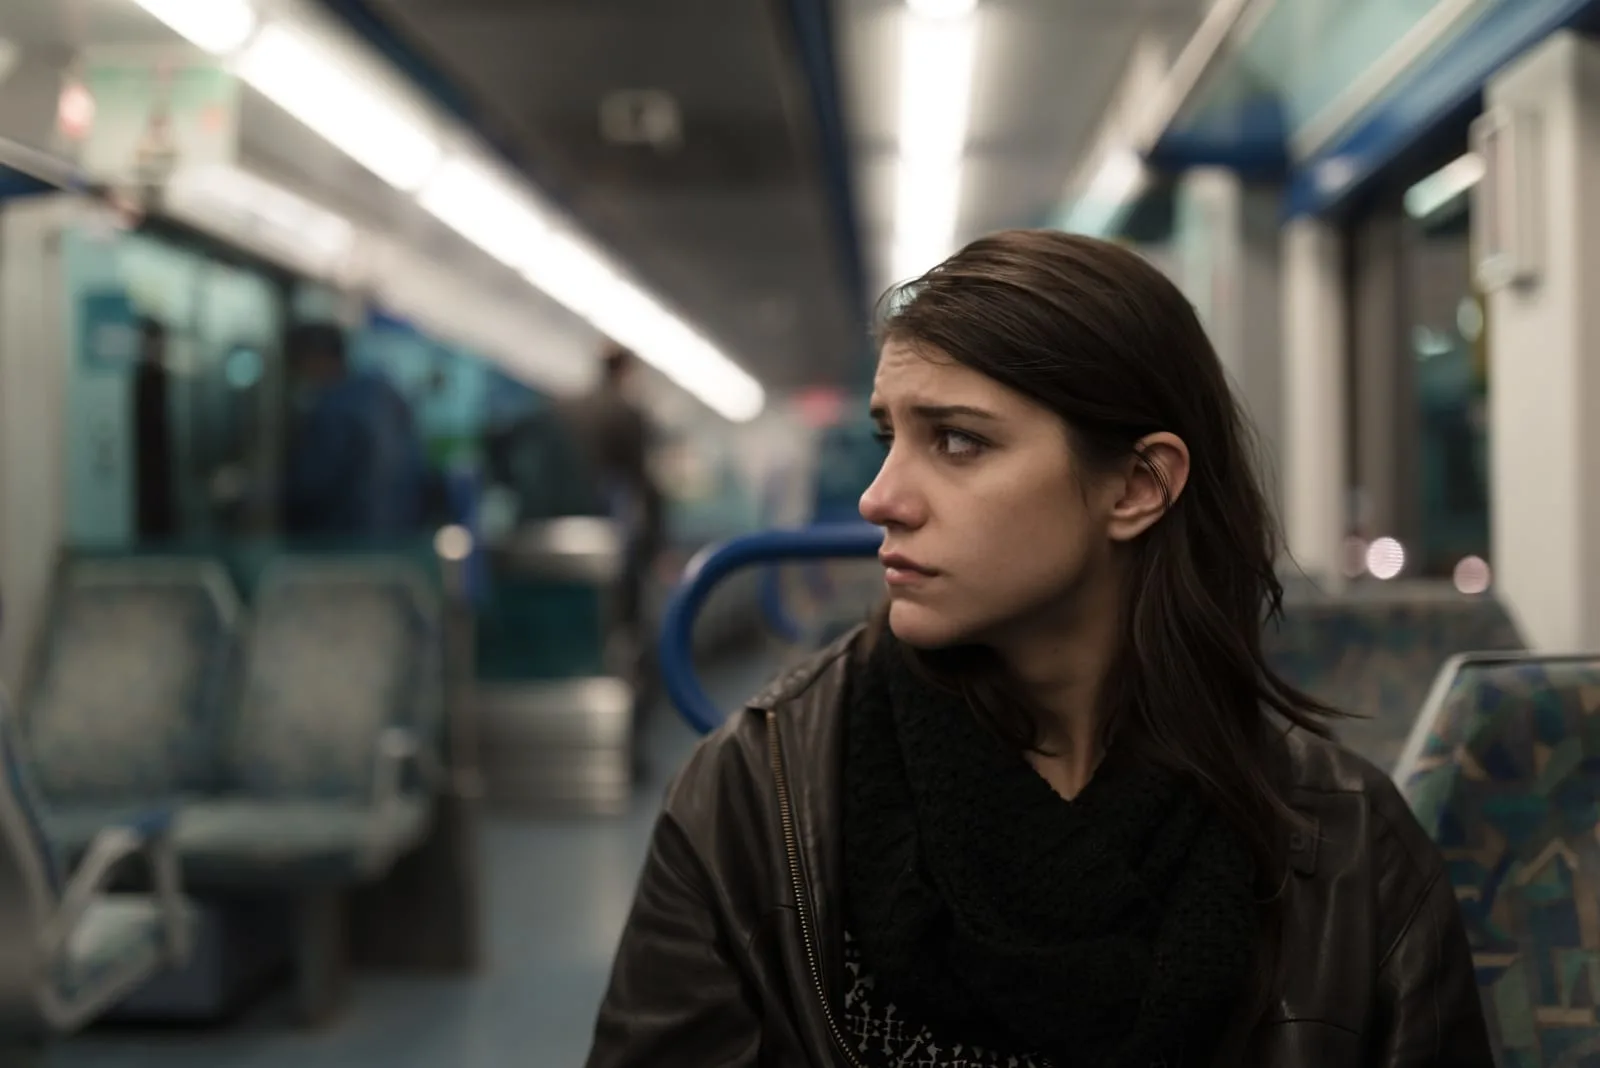 depressed young woman sitting in train